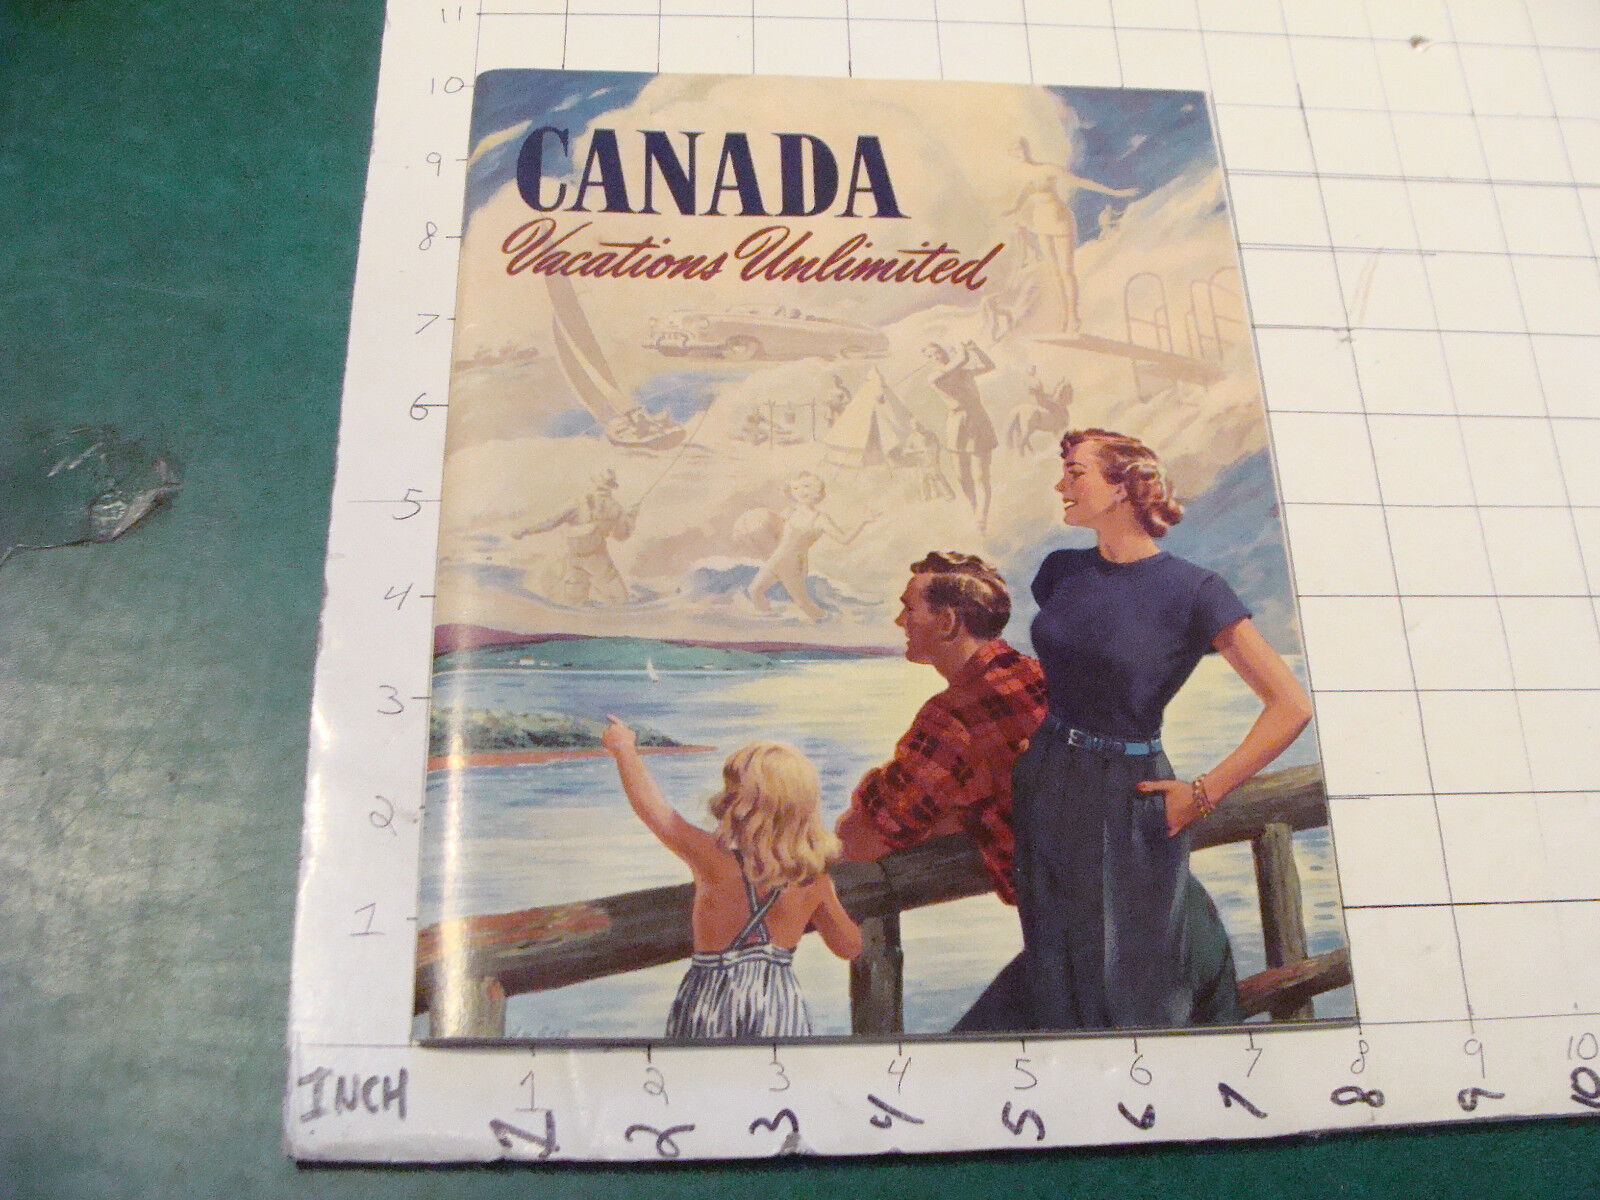 Vintage CANADA VACATIONS UNLIMITED 50 pages, very clean and nice - undated